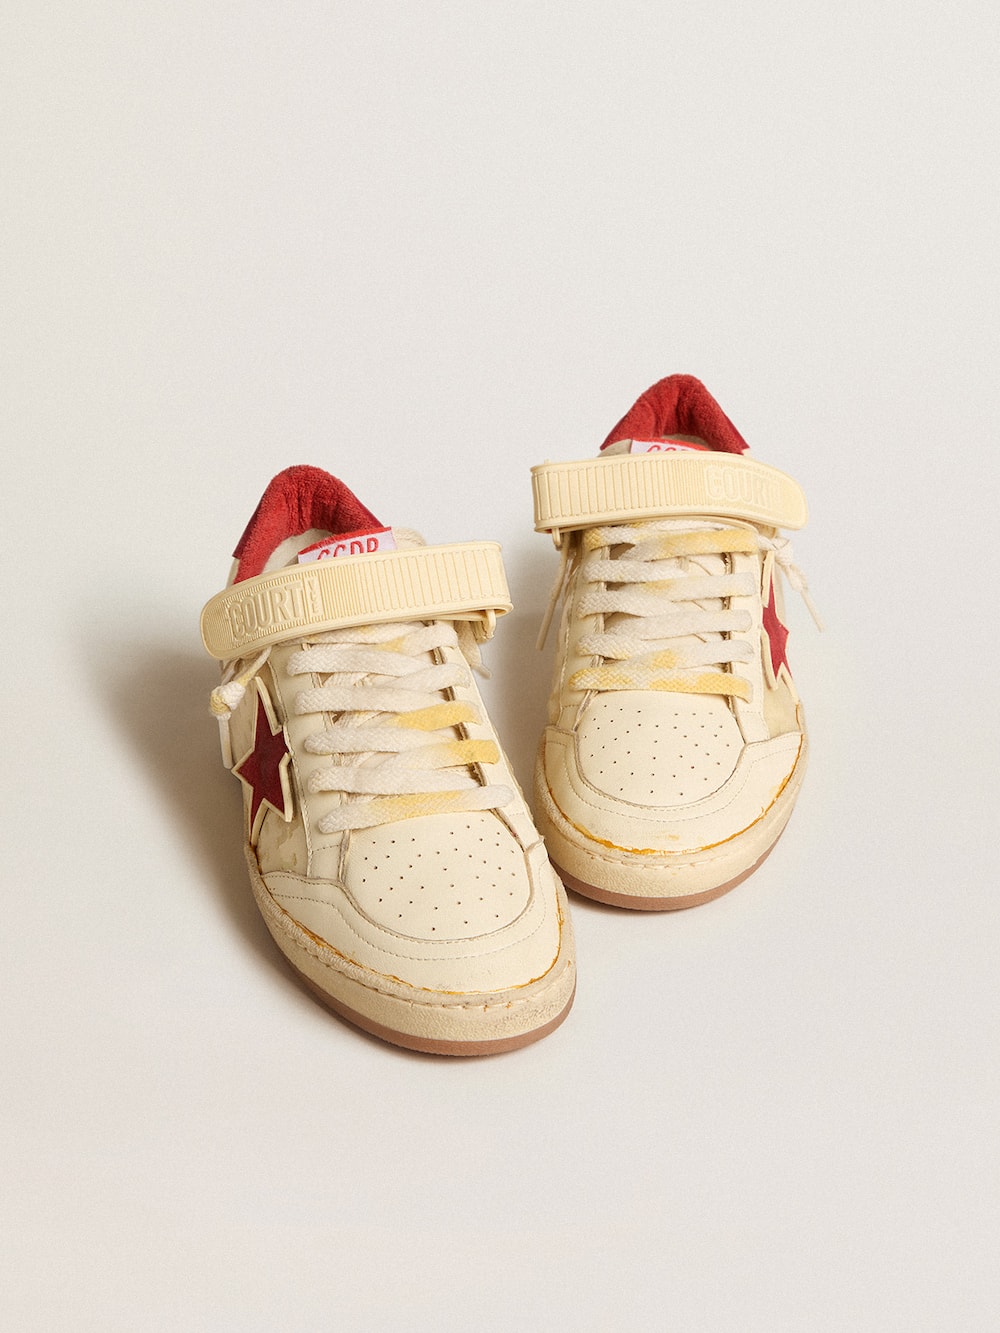 Golden Goose - Women’s Ball Star LAB in cream-colored nappa with red suede star in 